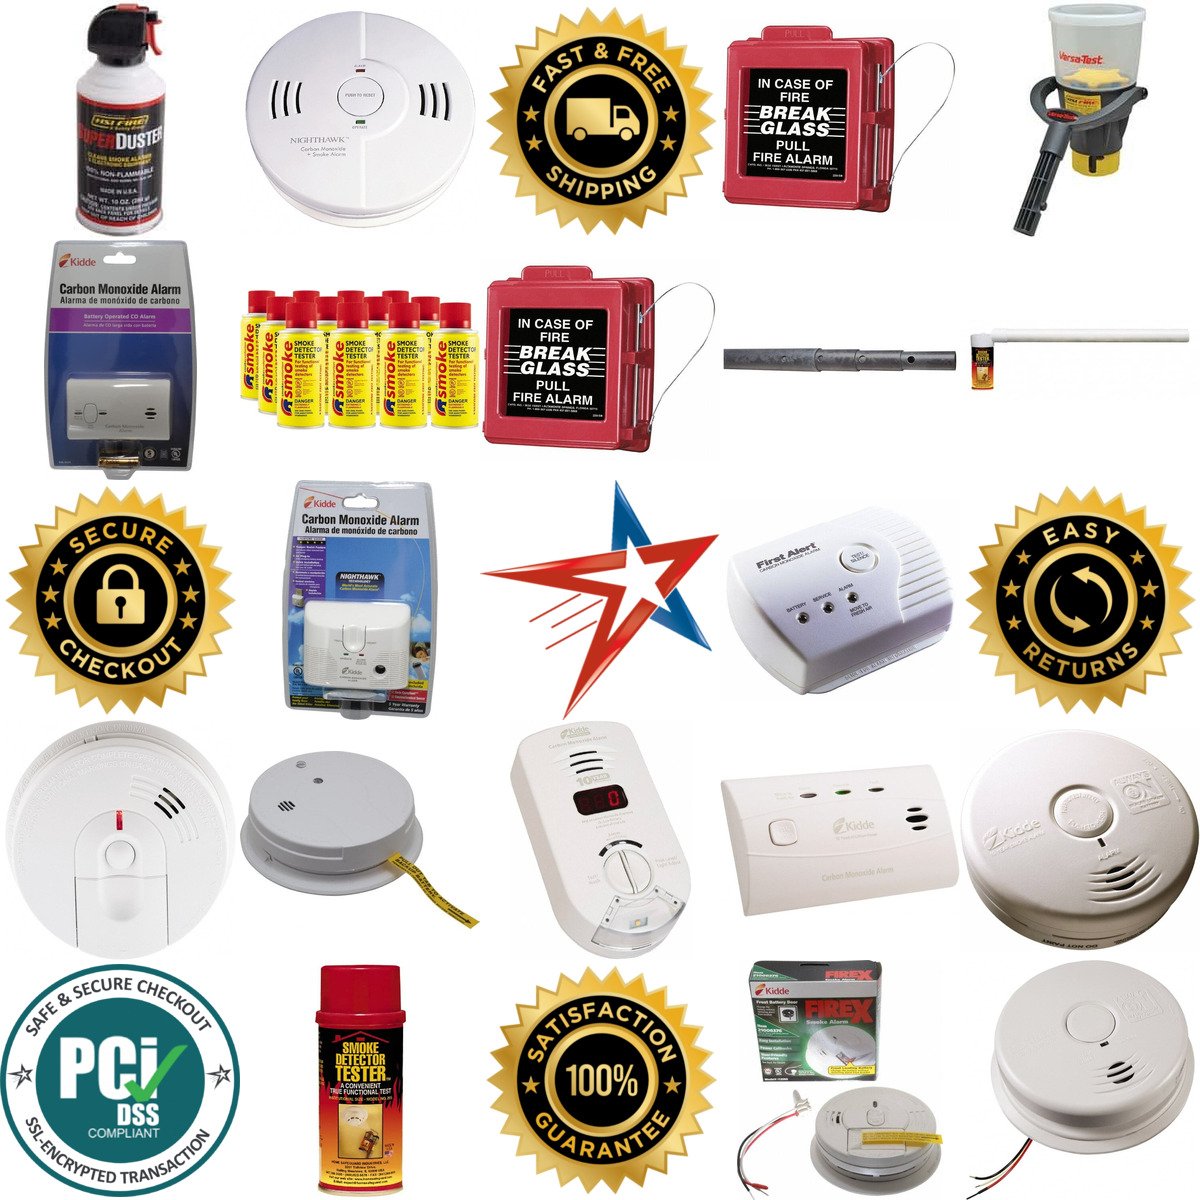 A selection of Smoke and co Detectors and Alarms products on GoVets